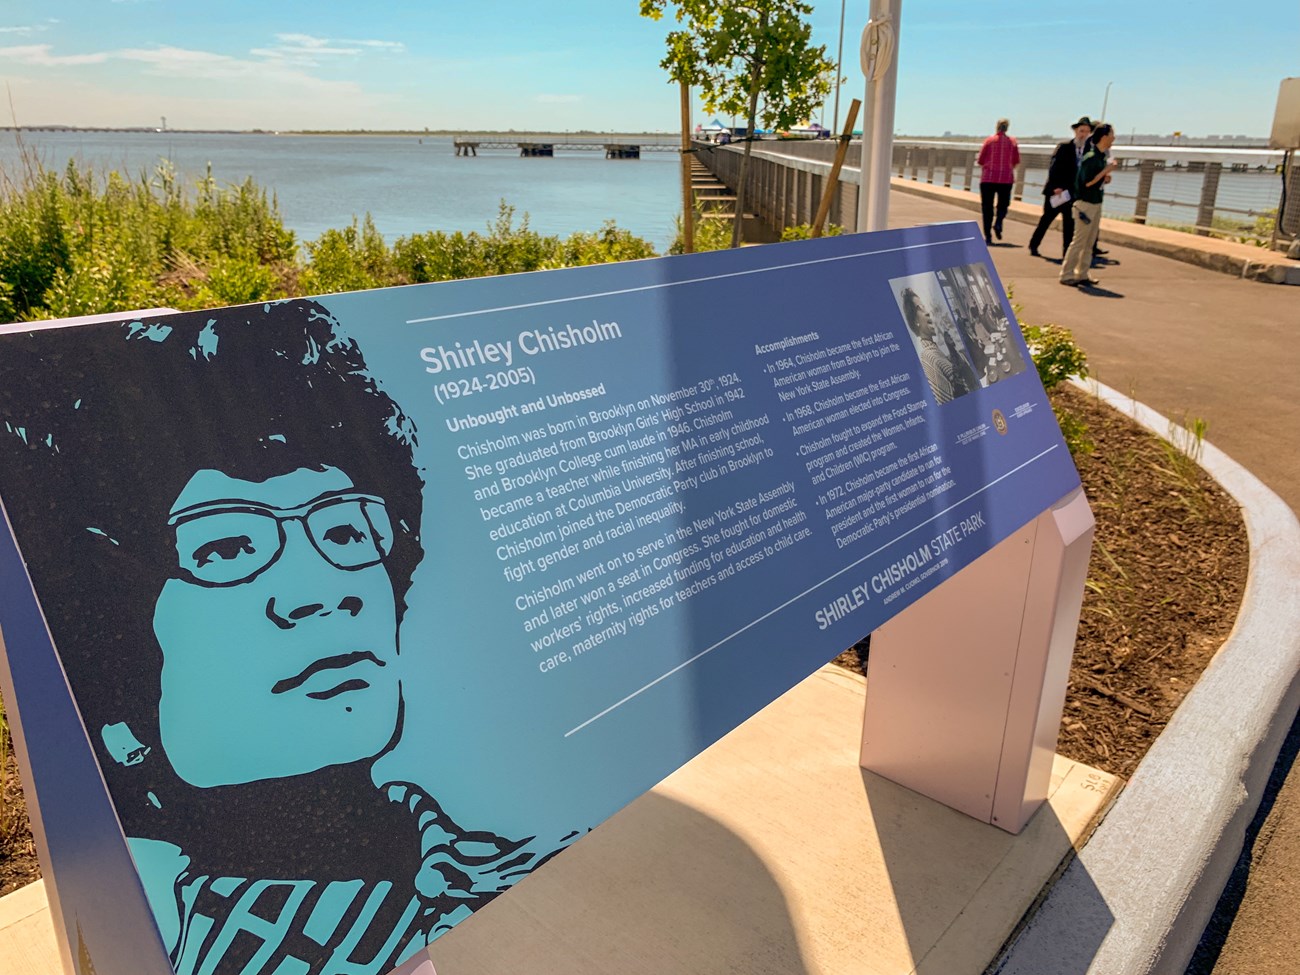 A sign at the park tells the story of Shirley Chisholm